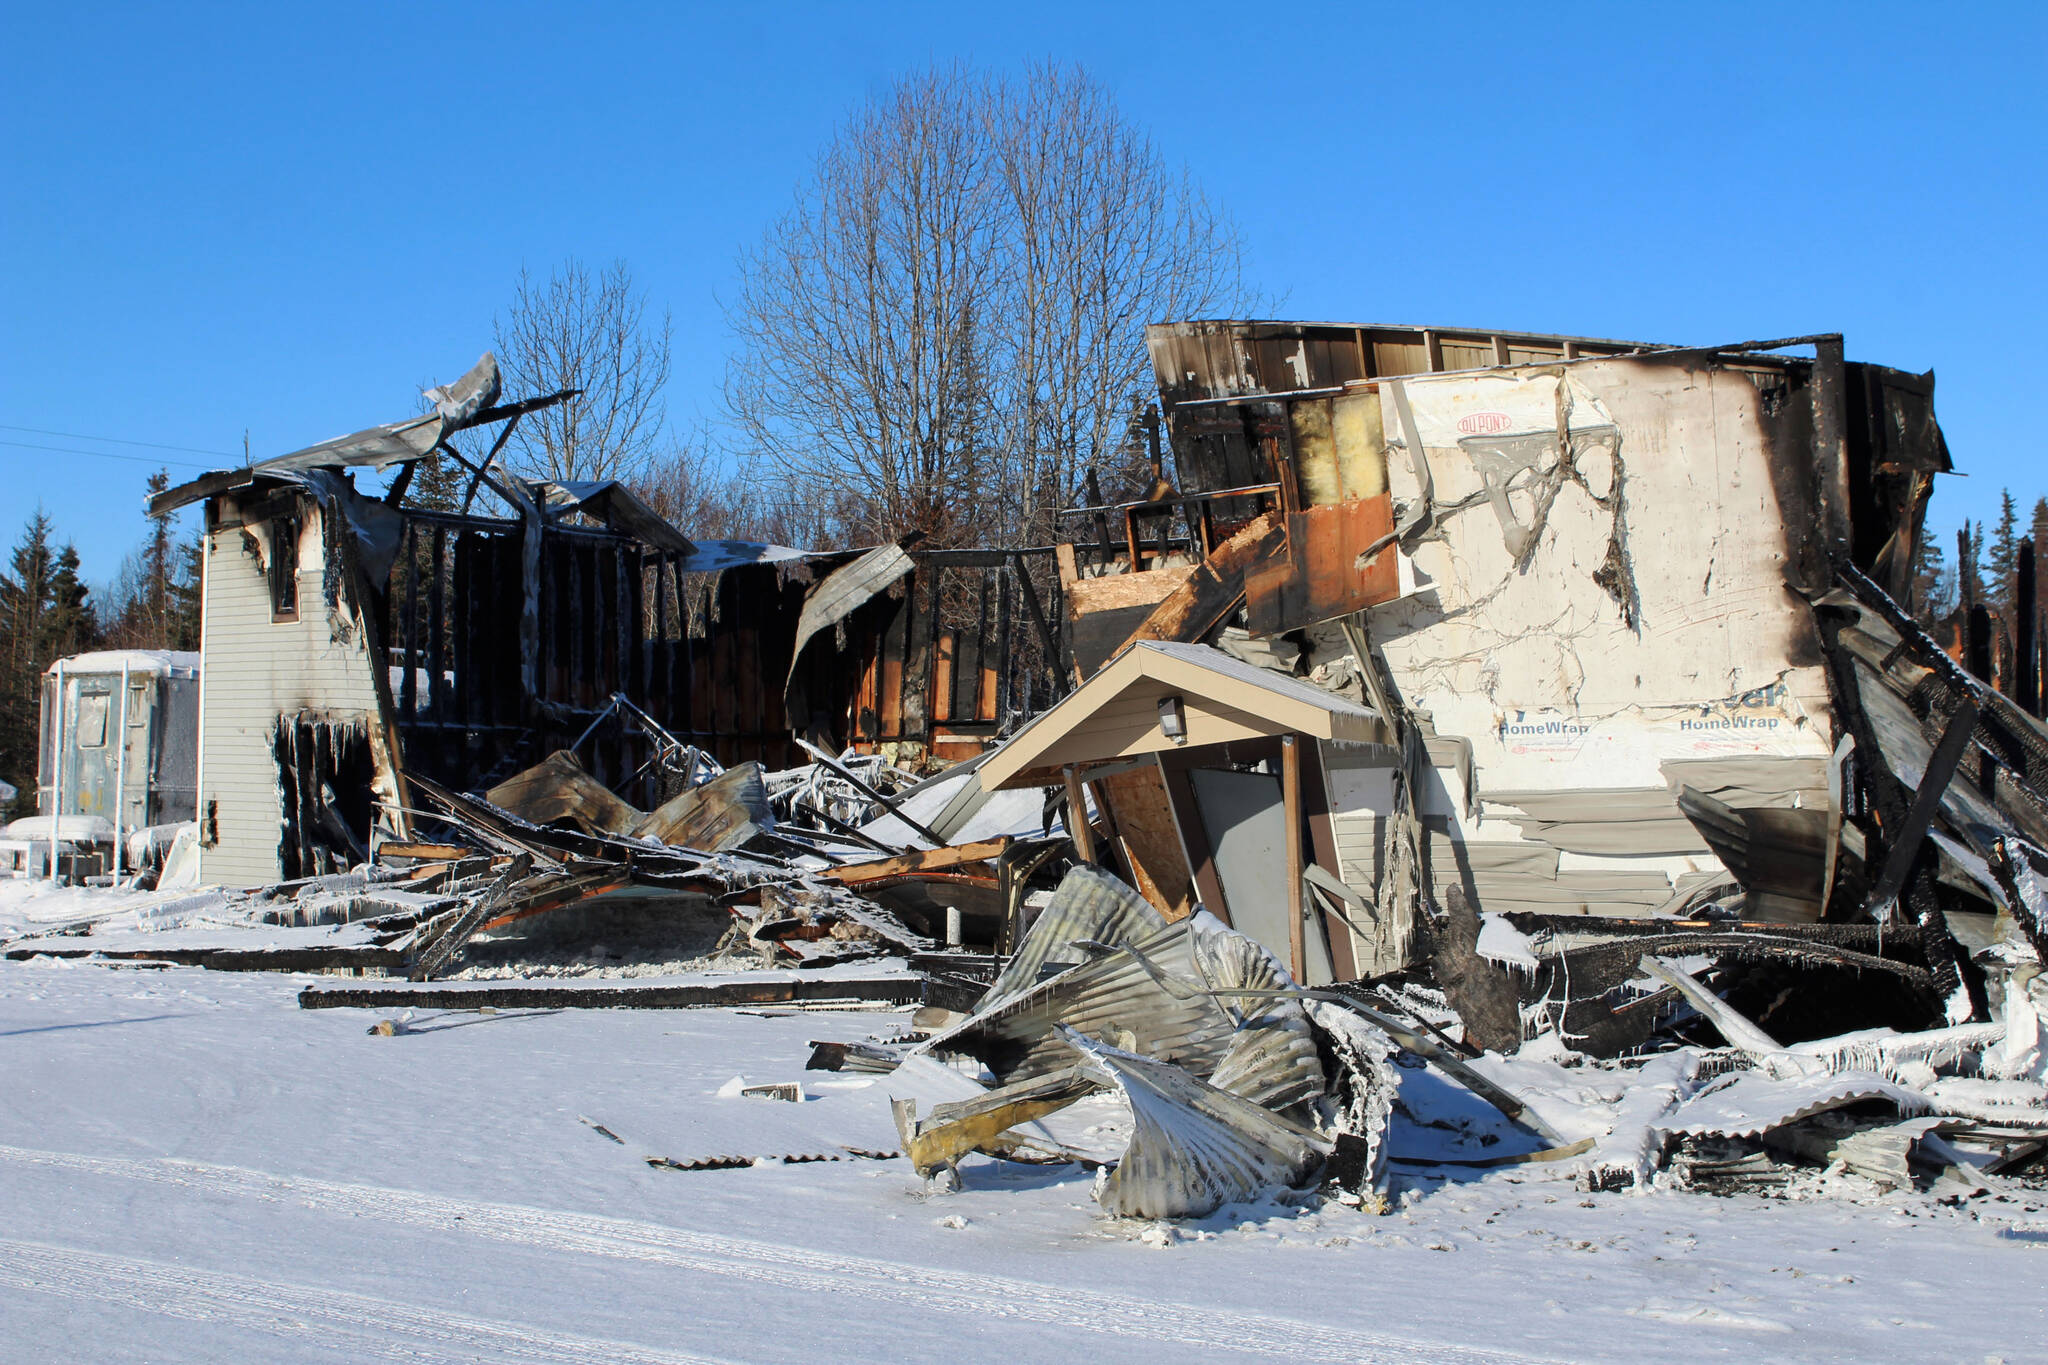 Triumvirate Theatre is seen on Monday, Feb. 22, 2021, in Nikiski, Alaska. The building burned in a fire on Feb. 20 of that year. (Ashlyn O’Hara/Peninsula Clarion)